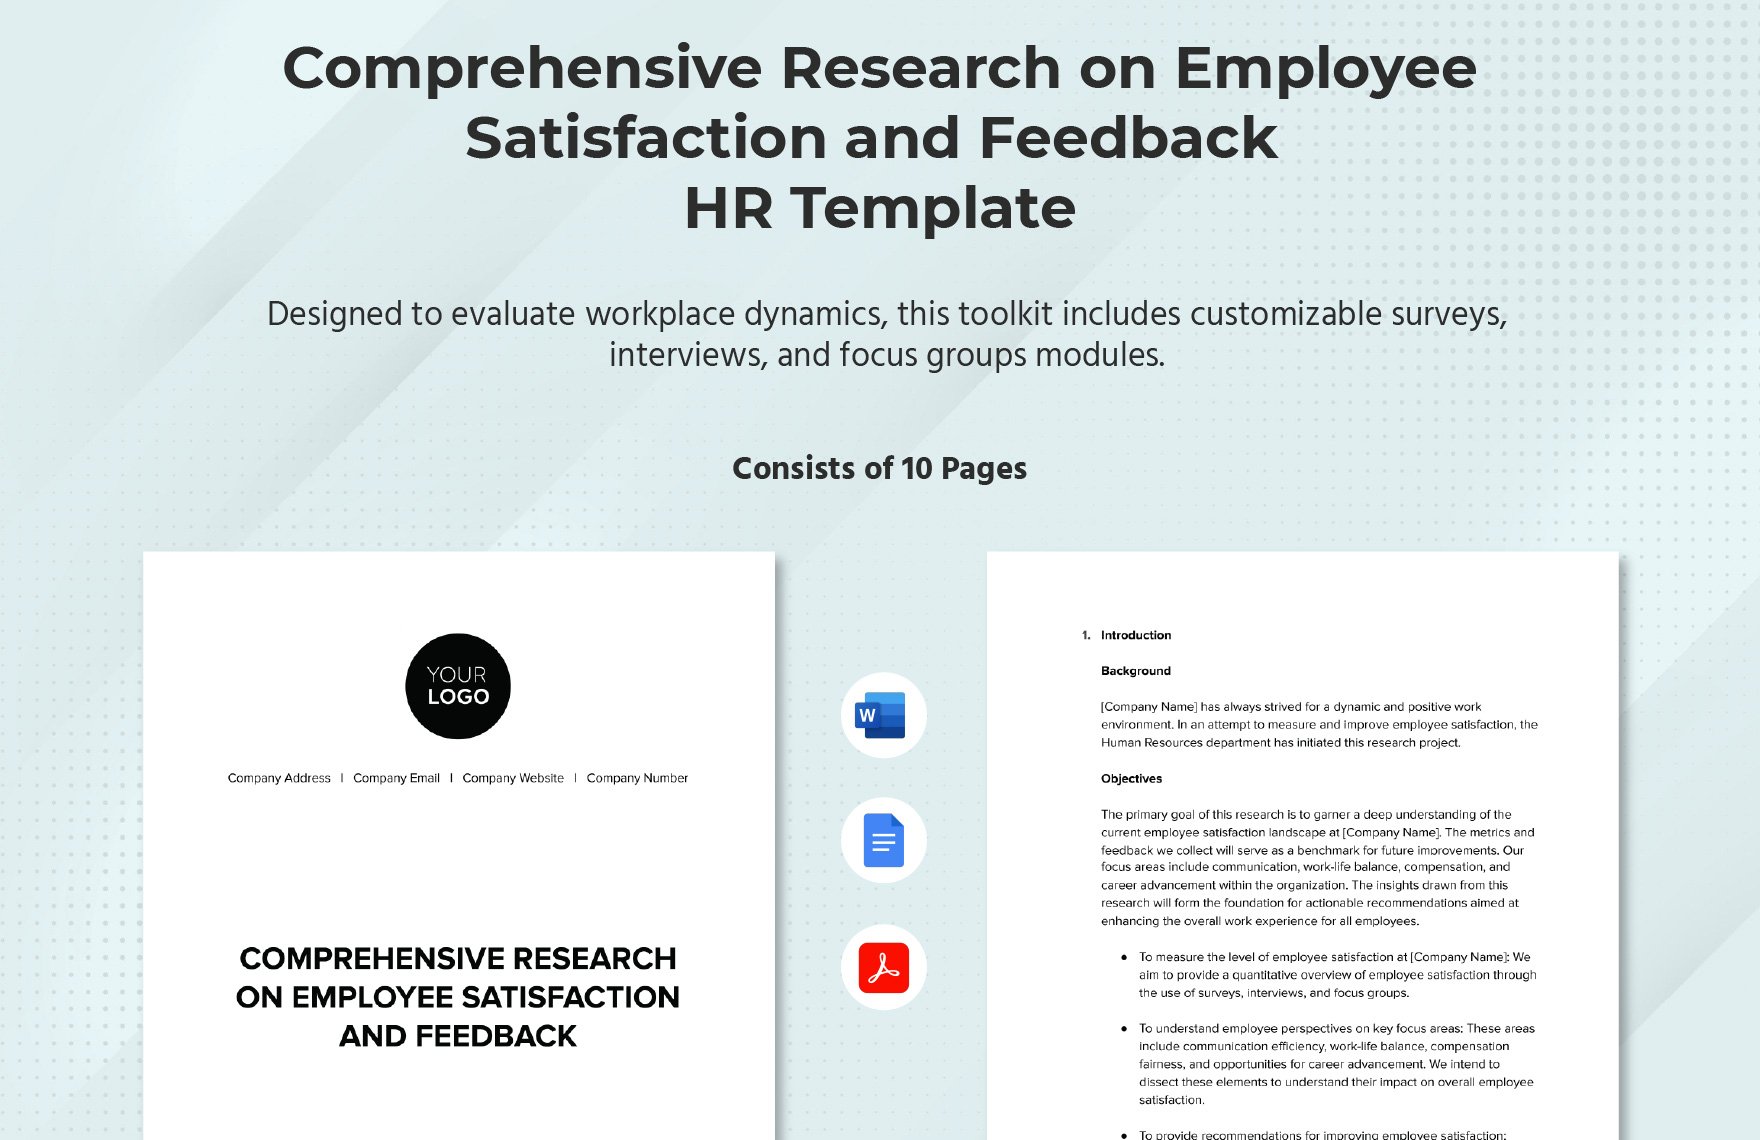 Comprehensive Research on Employee Satisfaction and Feedback HR Template